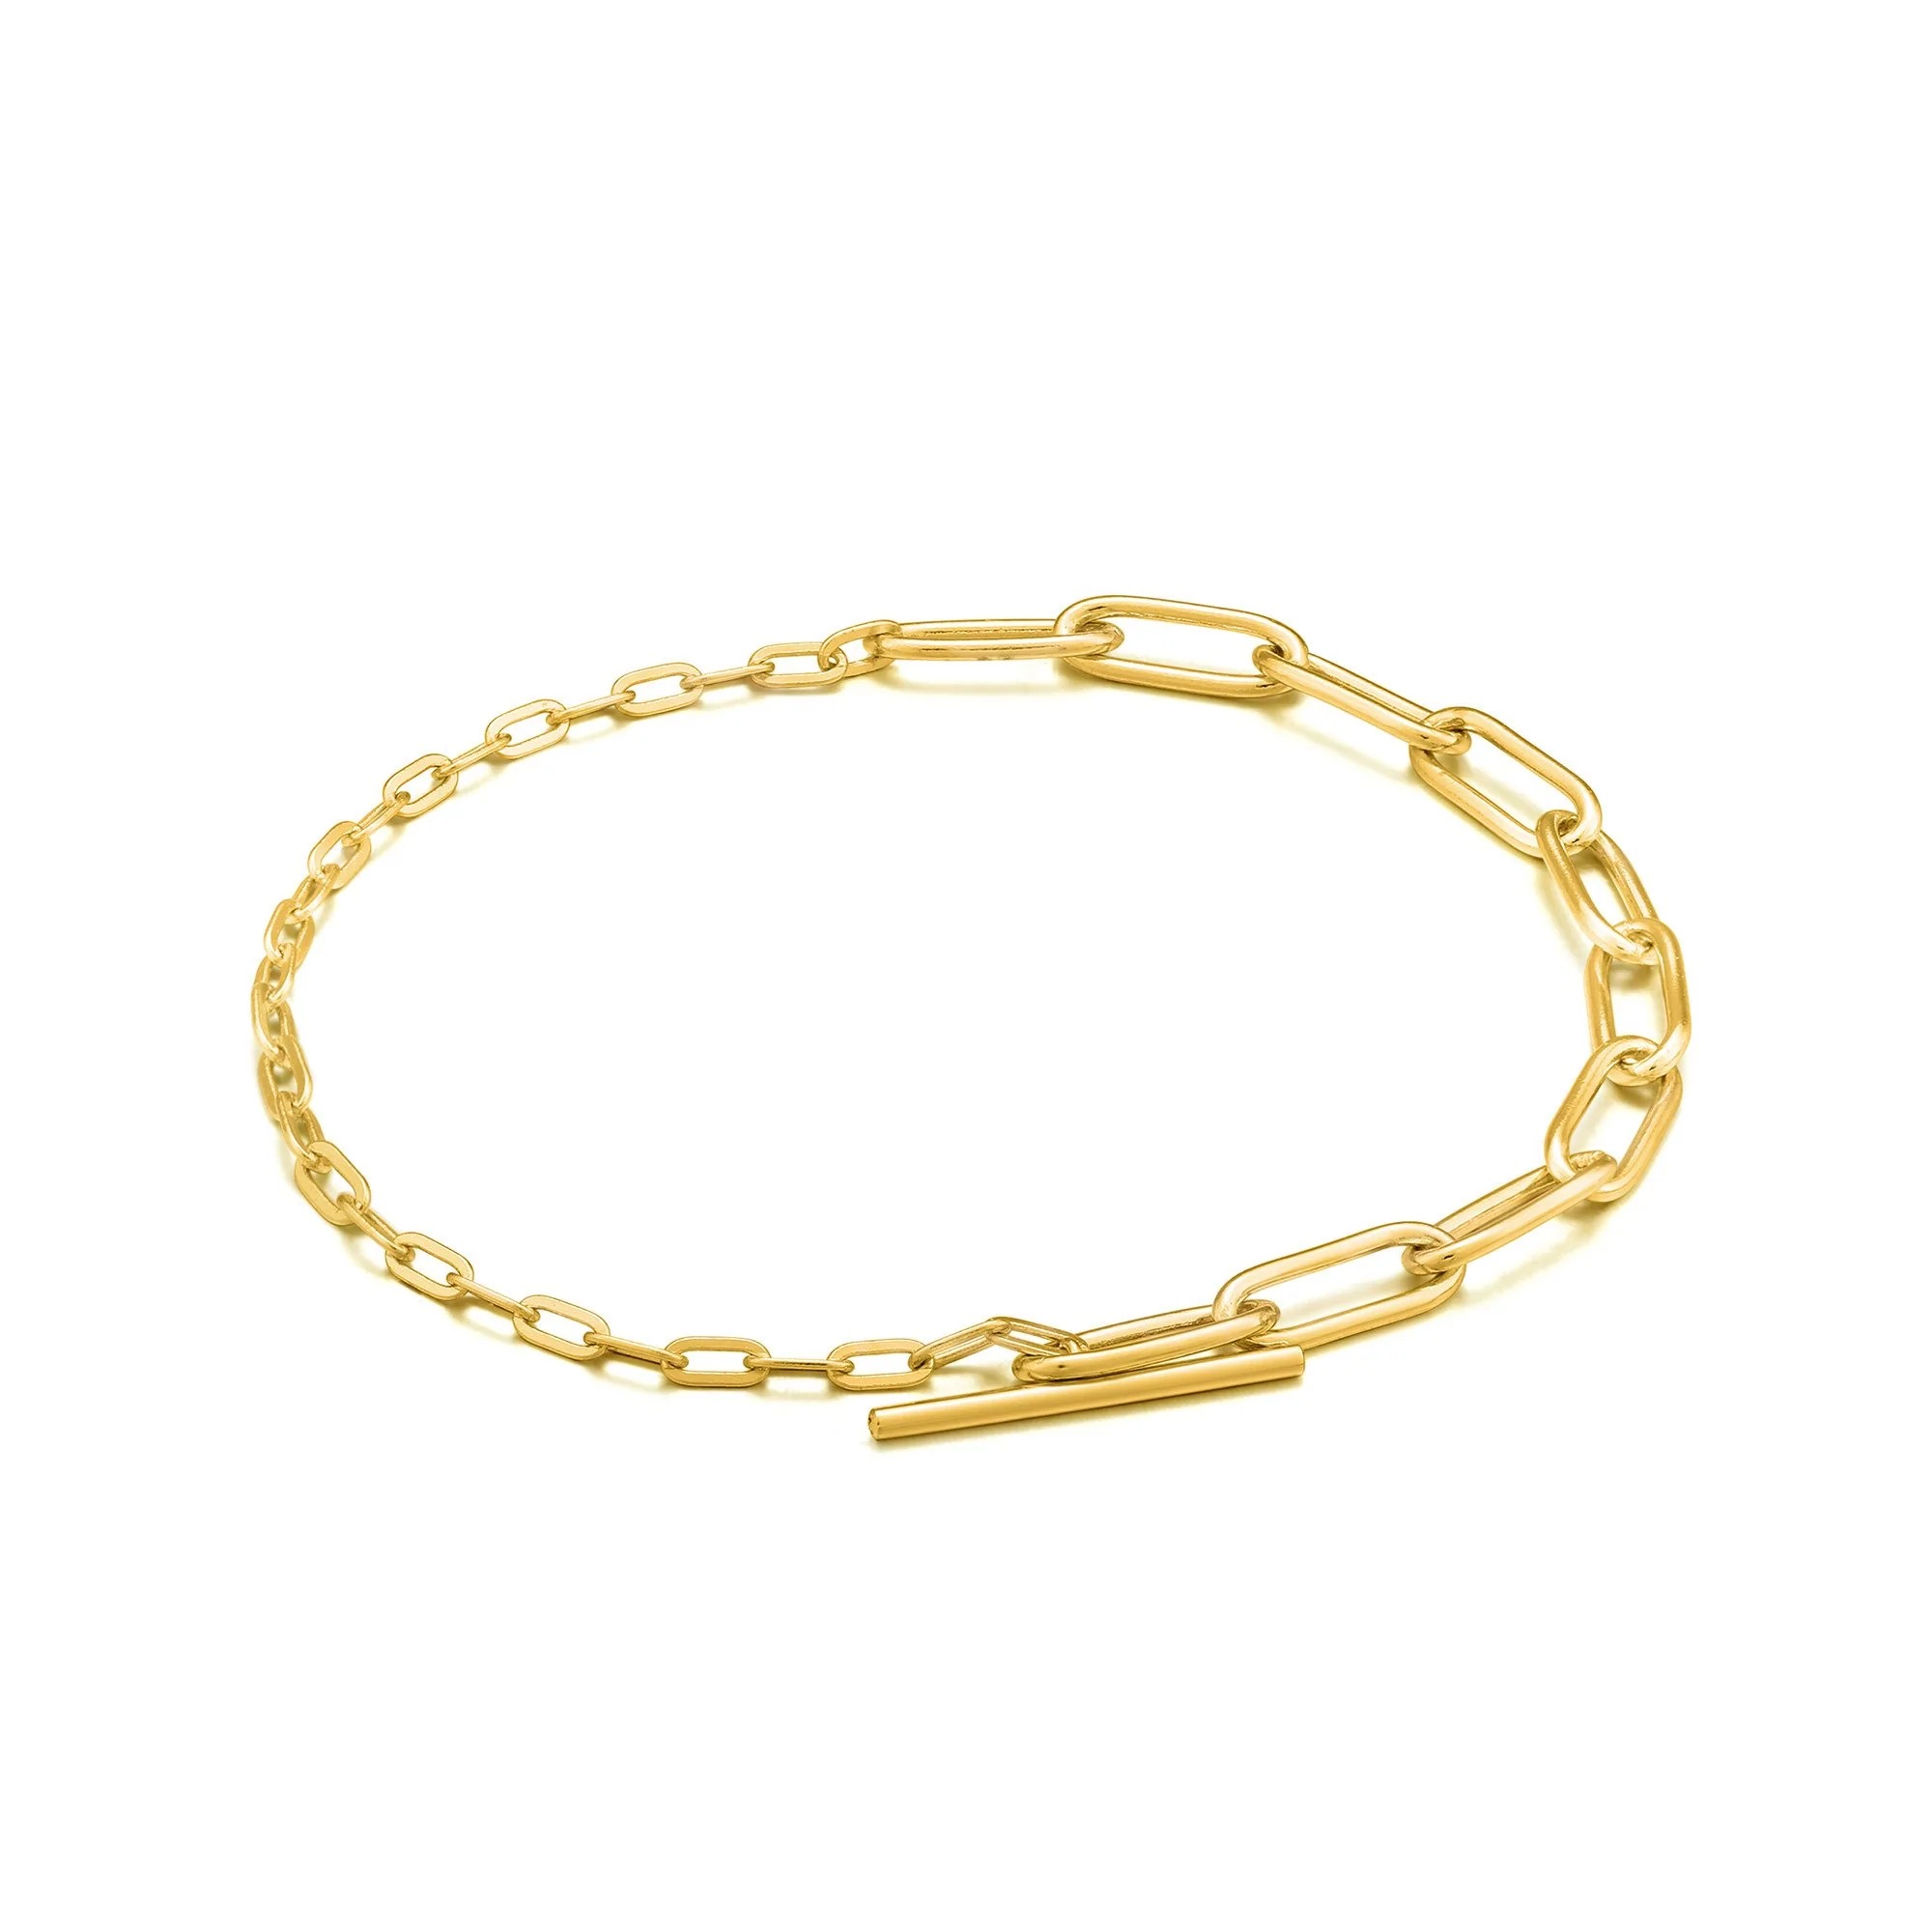 ANIA HAIE Mixed Link T-bar Bracelet, Gold-Plated